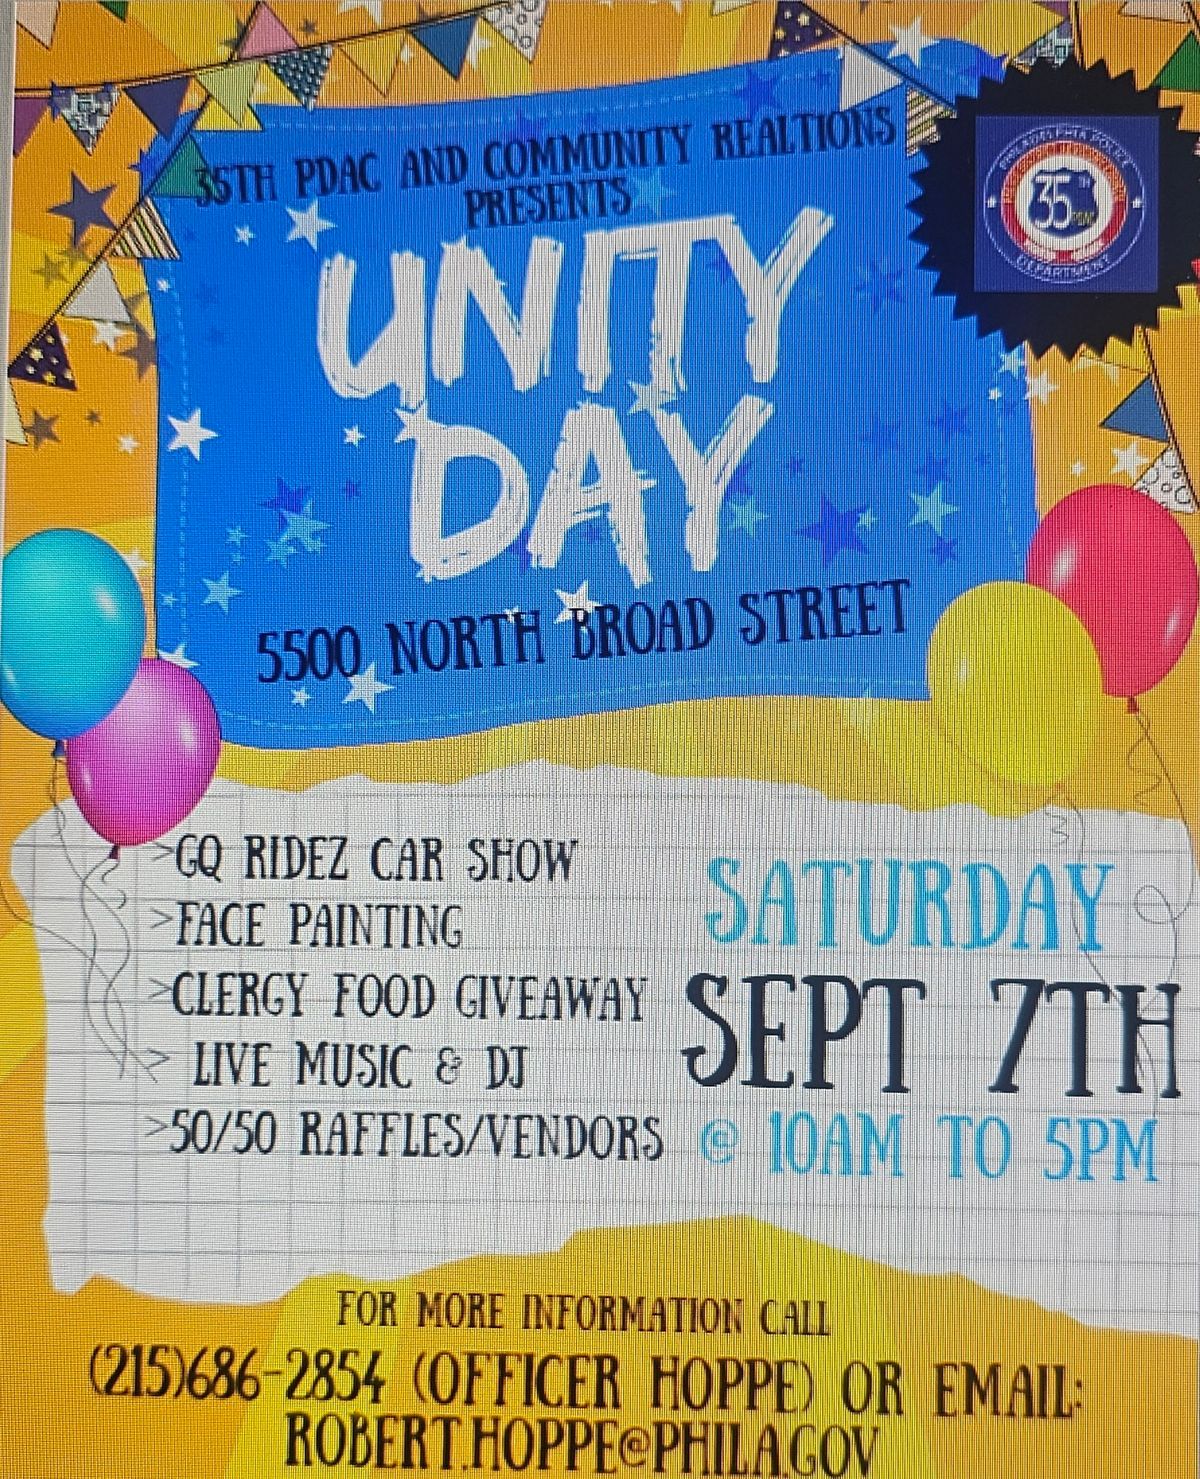 35th District Unity Day